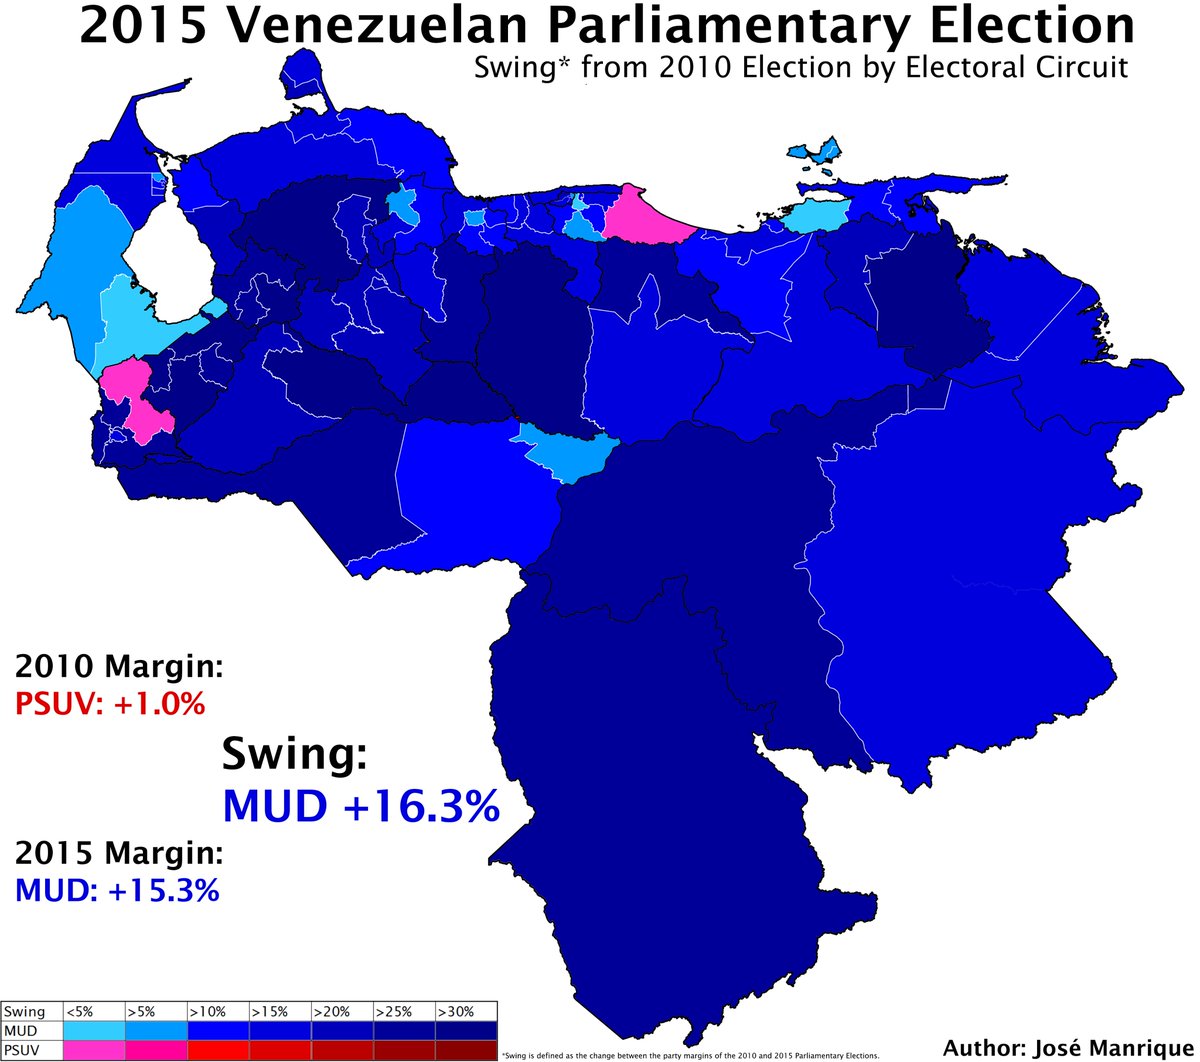 This is the swing map by electoral circuit, comparing it to the 2010 election. It is almost entirely a sea of deep blue.